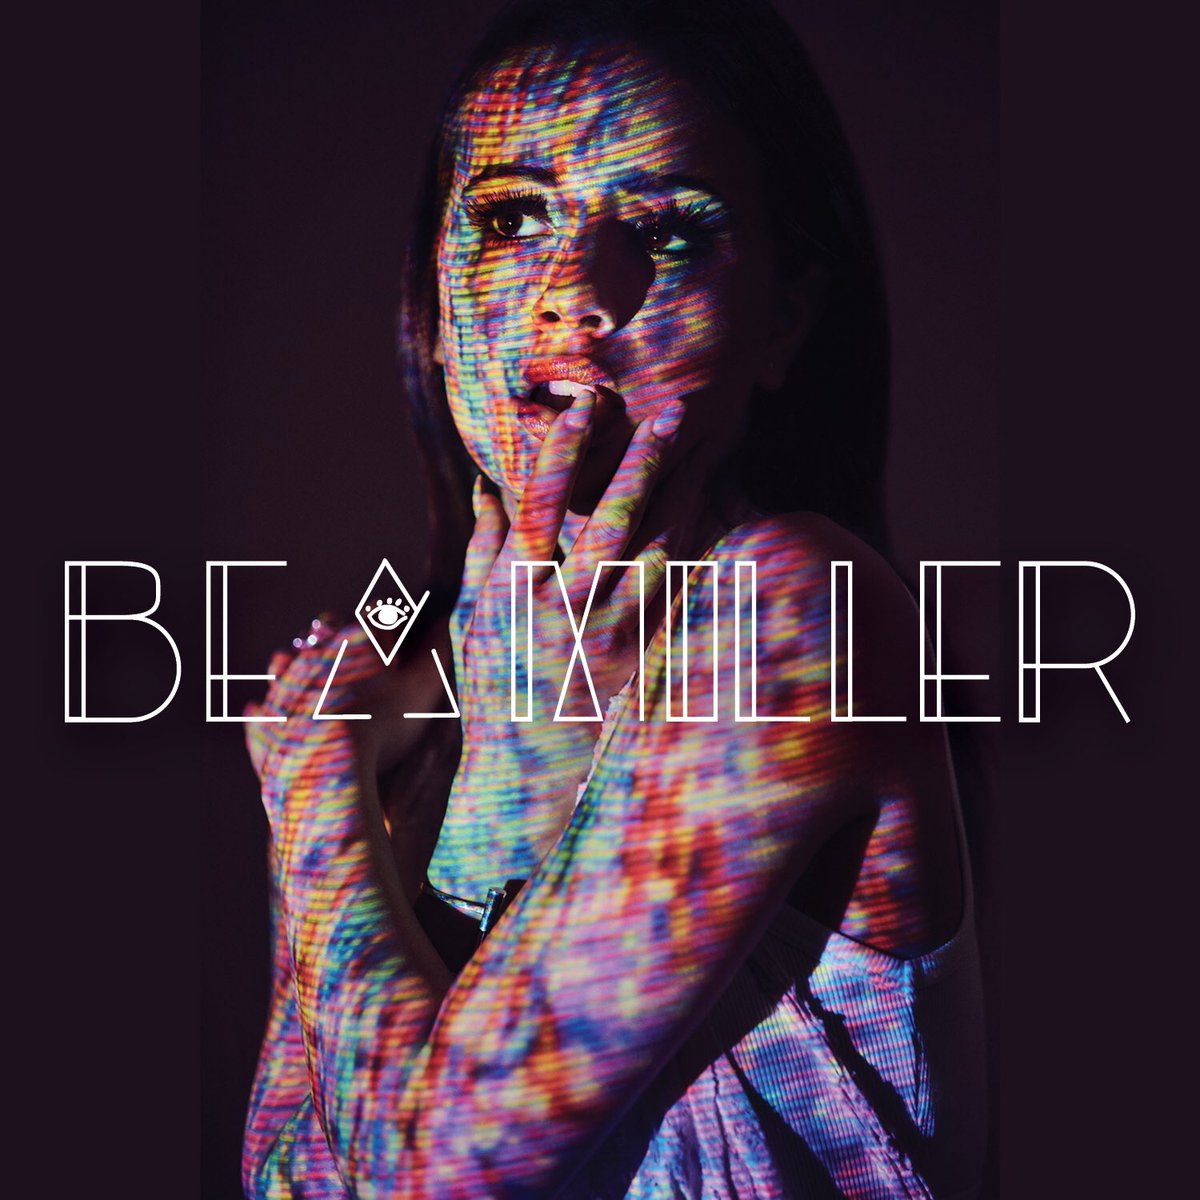 Go get my lil sis @BeaMiller’s new song!! https://t.co/j46blkPa6h #YESGIRLONITUNES https://t.co/v3iJZJu2H8